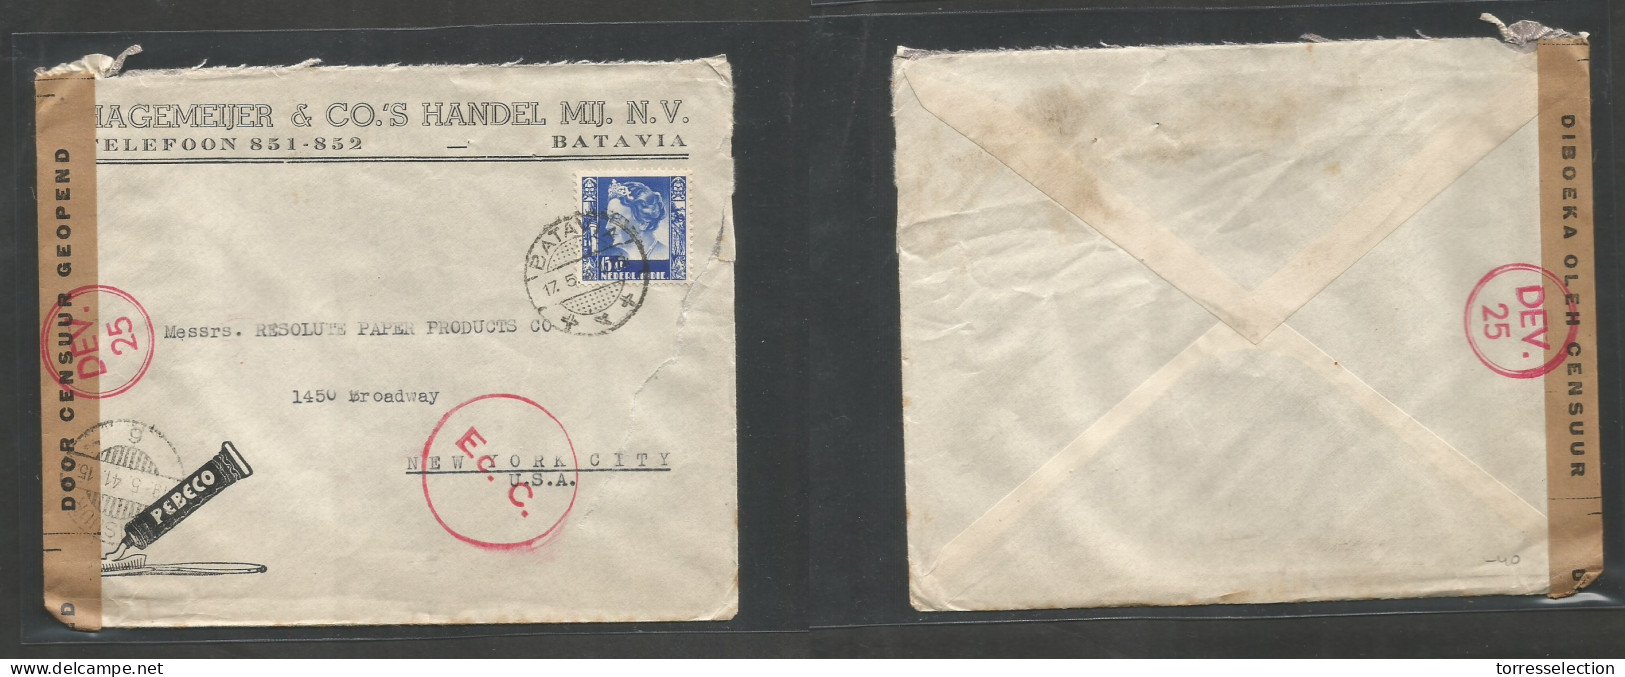 DUTCH INDIES. 1940 (17 May) WWII Batavia - USA, NYC. Comercial Illustrated Toothpaste Single 15c Blue Sea Mail Rate Cens - Indes Néerlandaises